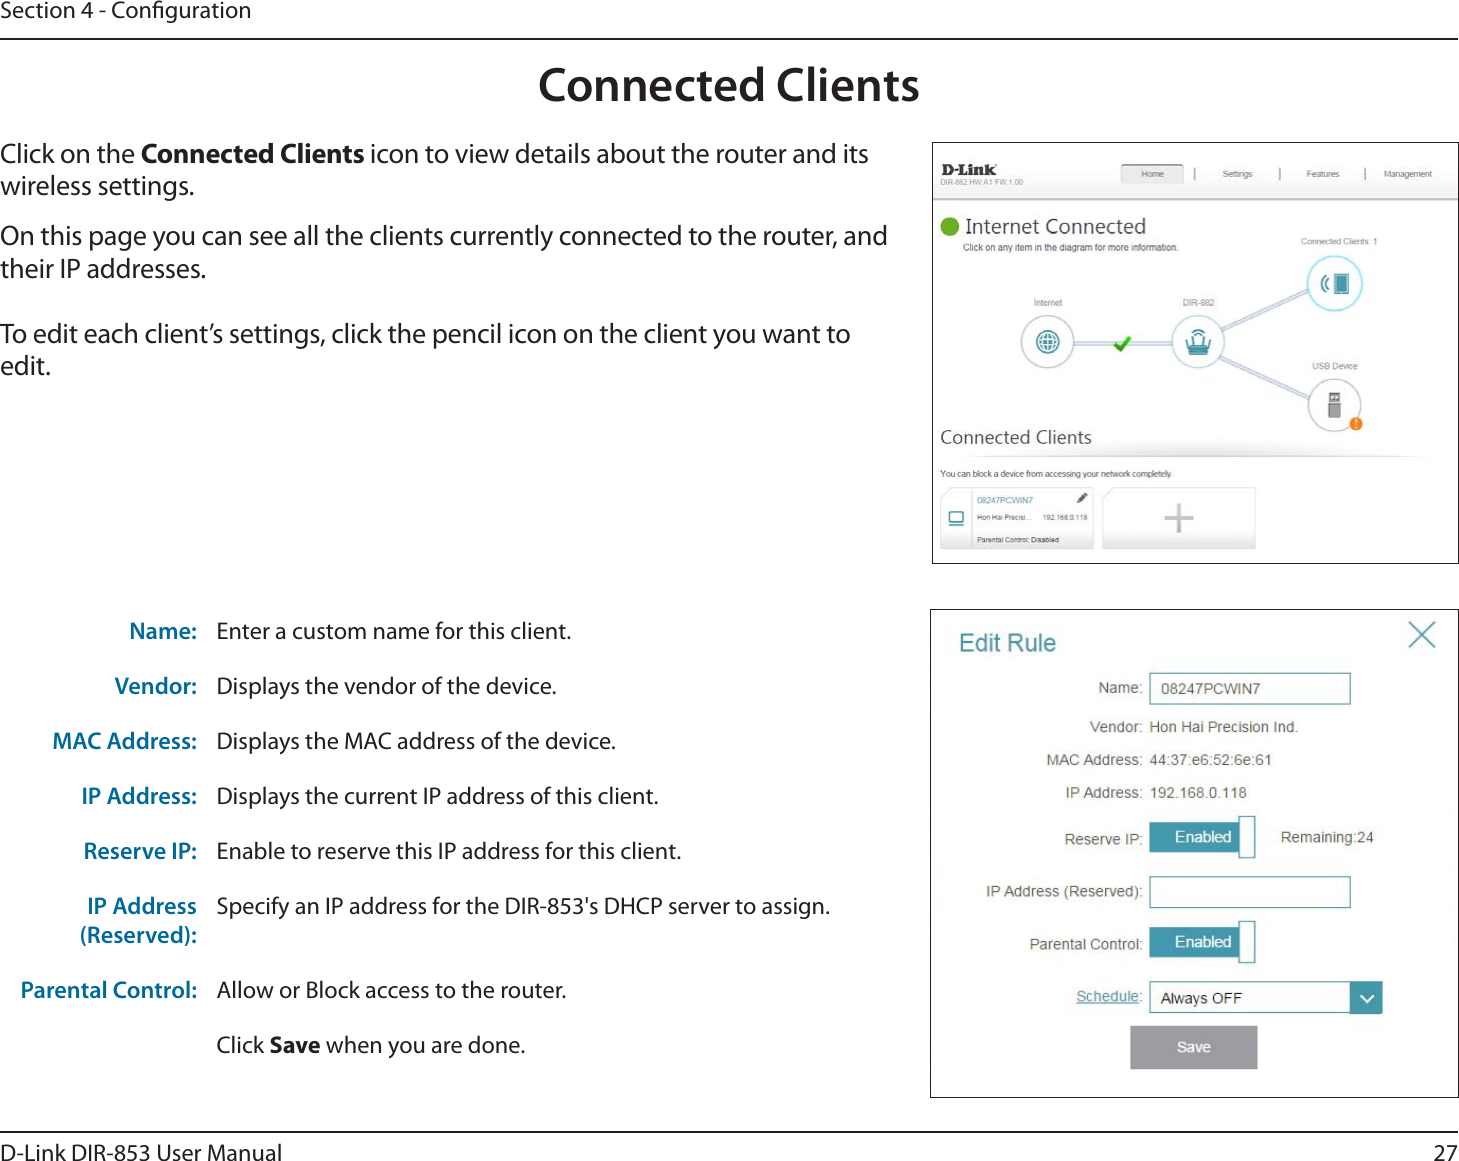 27D-Link DIR-853 User ManualSection 4 - CongurationConnected ClientsClick on the Connected Clients icon to view details about the router and its wireless settings.On this page you can see all the clients currently connected to the router, and their IP addresses.To edit each client’s settings, click the pencil icon on the client you want to edit.Name: Enter a custom name for this client.Vendor: Displays the vendor of the device.MAC Address: Displays the MAC address of the device.IP Address: Displays the current IP address of this client.Reserve IP: Enable to reserve this IP address for this client.IP Address (Reserved):Specify an IP address for the DIR-853&apos;s DHCP server to assign.Parental Control: Allow or Block access to the router.Click Save when you are done.